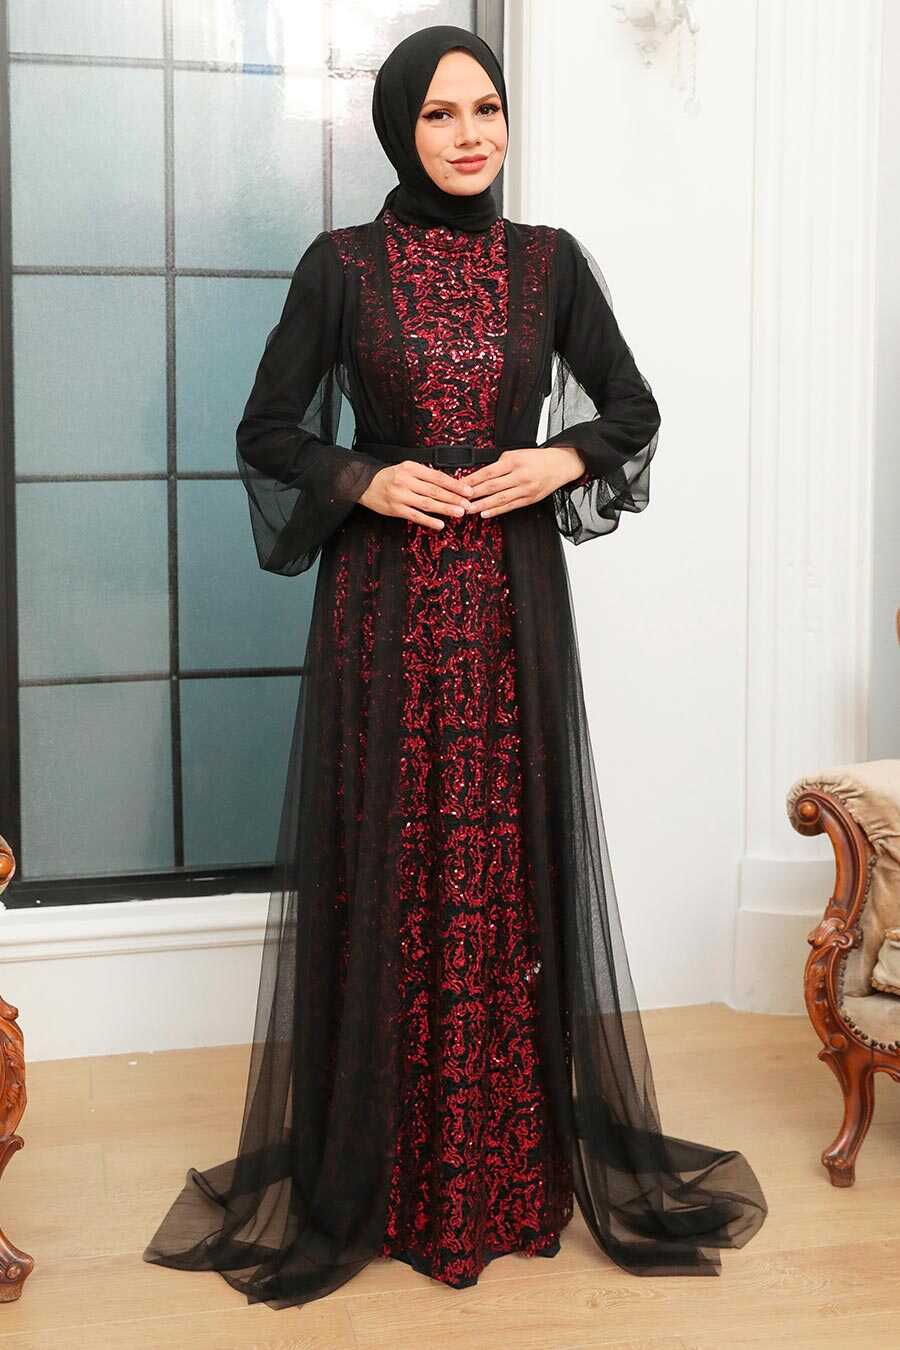  Luxorious Black Claret Red Islamic Evening Gown 5383SBR